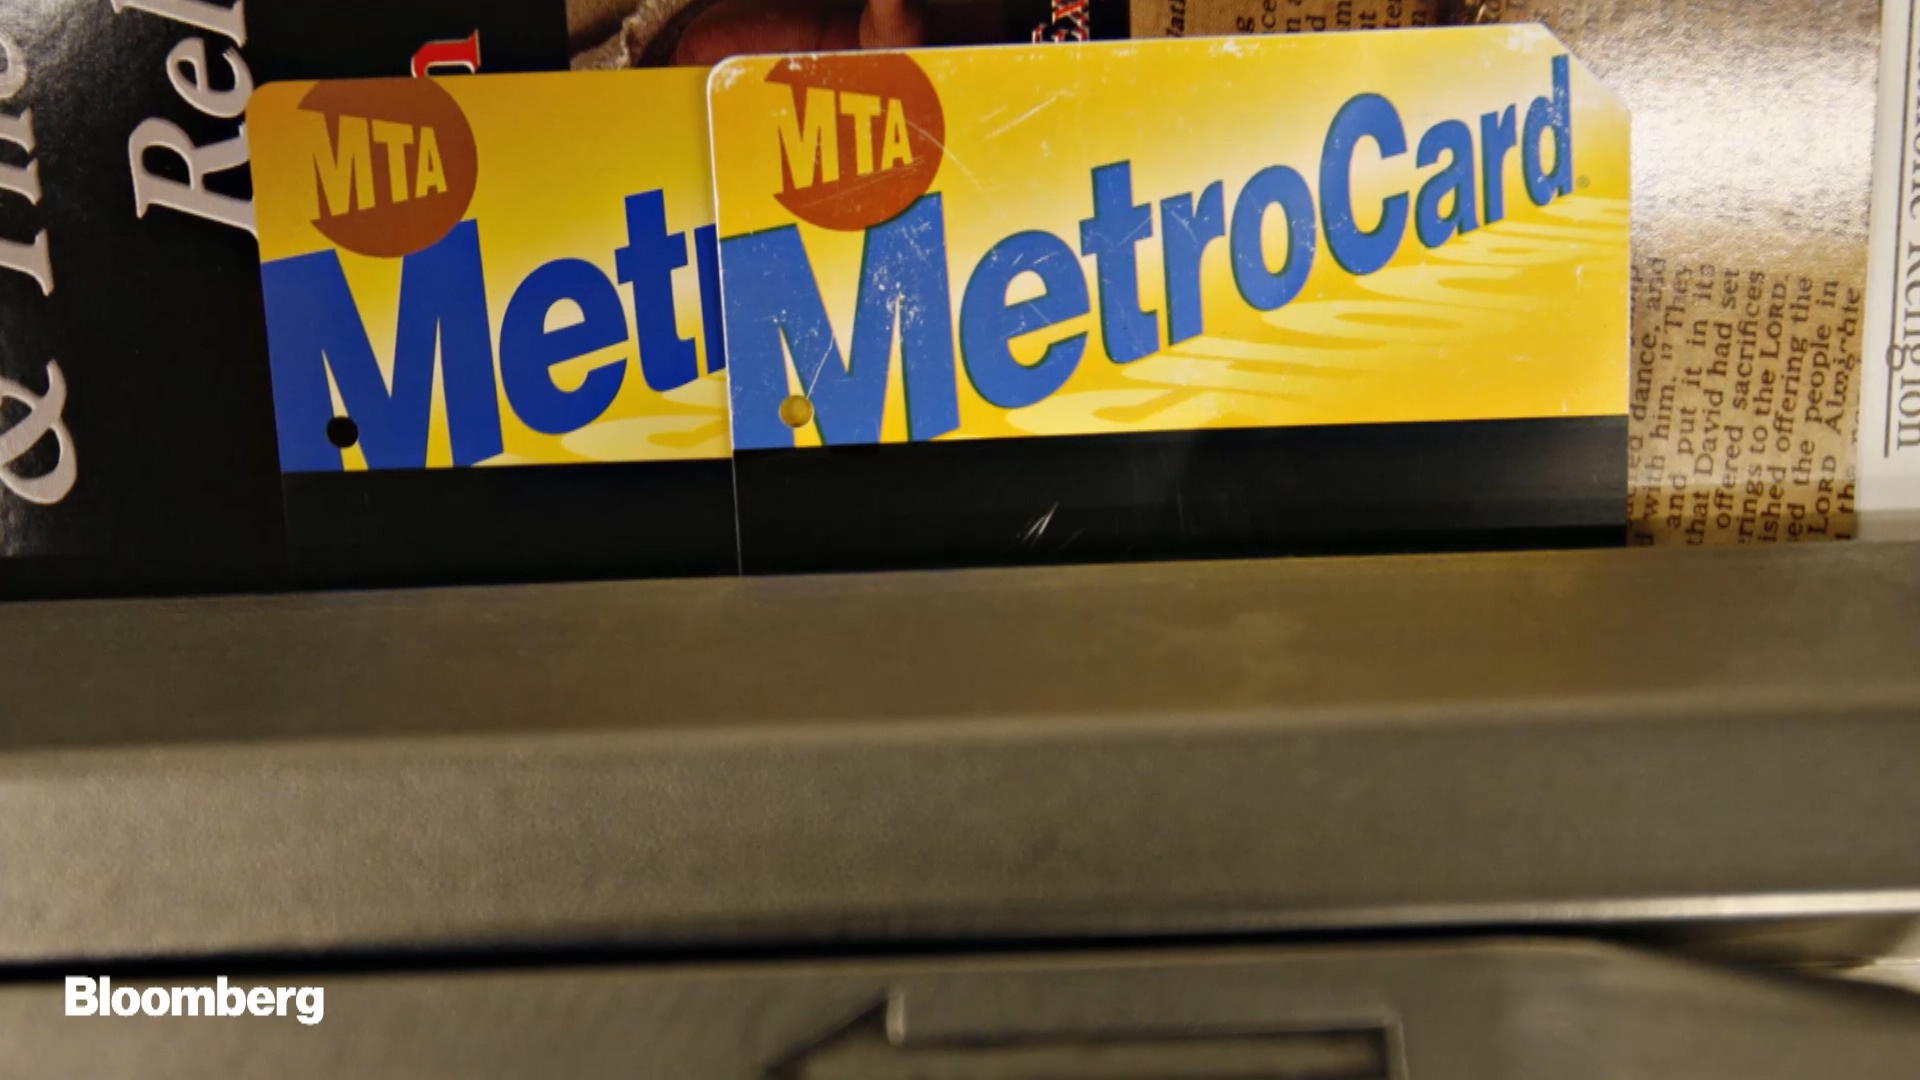 can i buy nyc metrocard with bitcoin